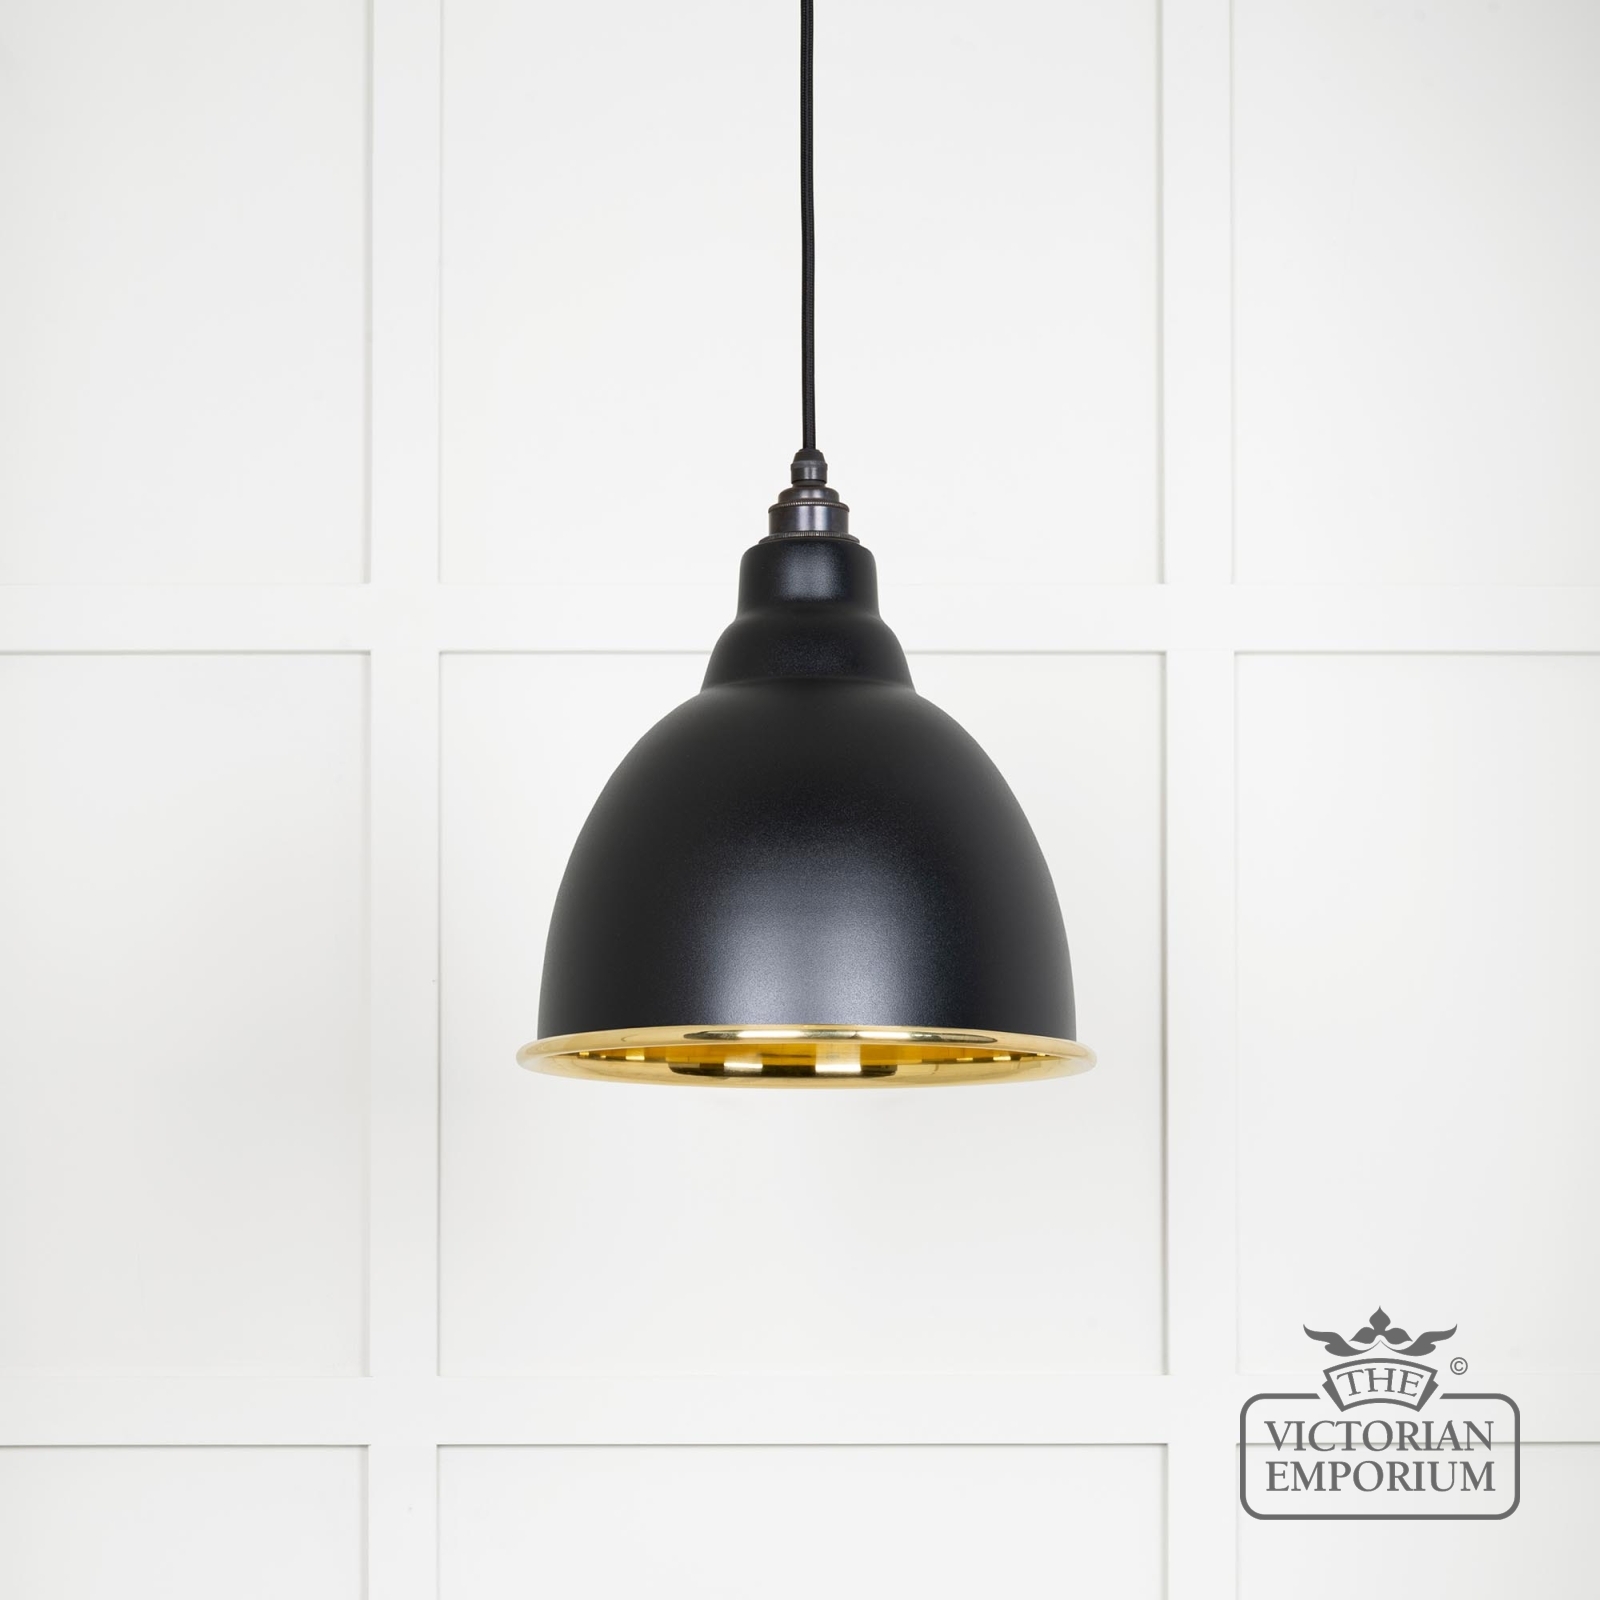 Brindle pendant light in Smooth brass and Black finish